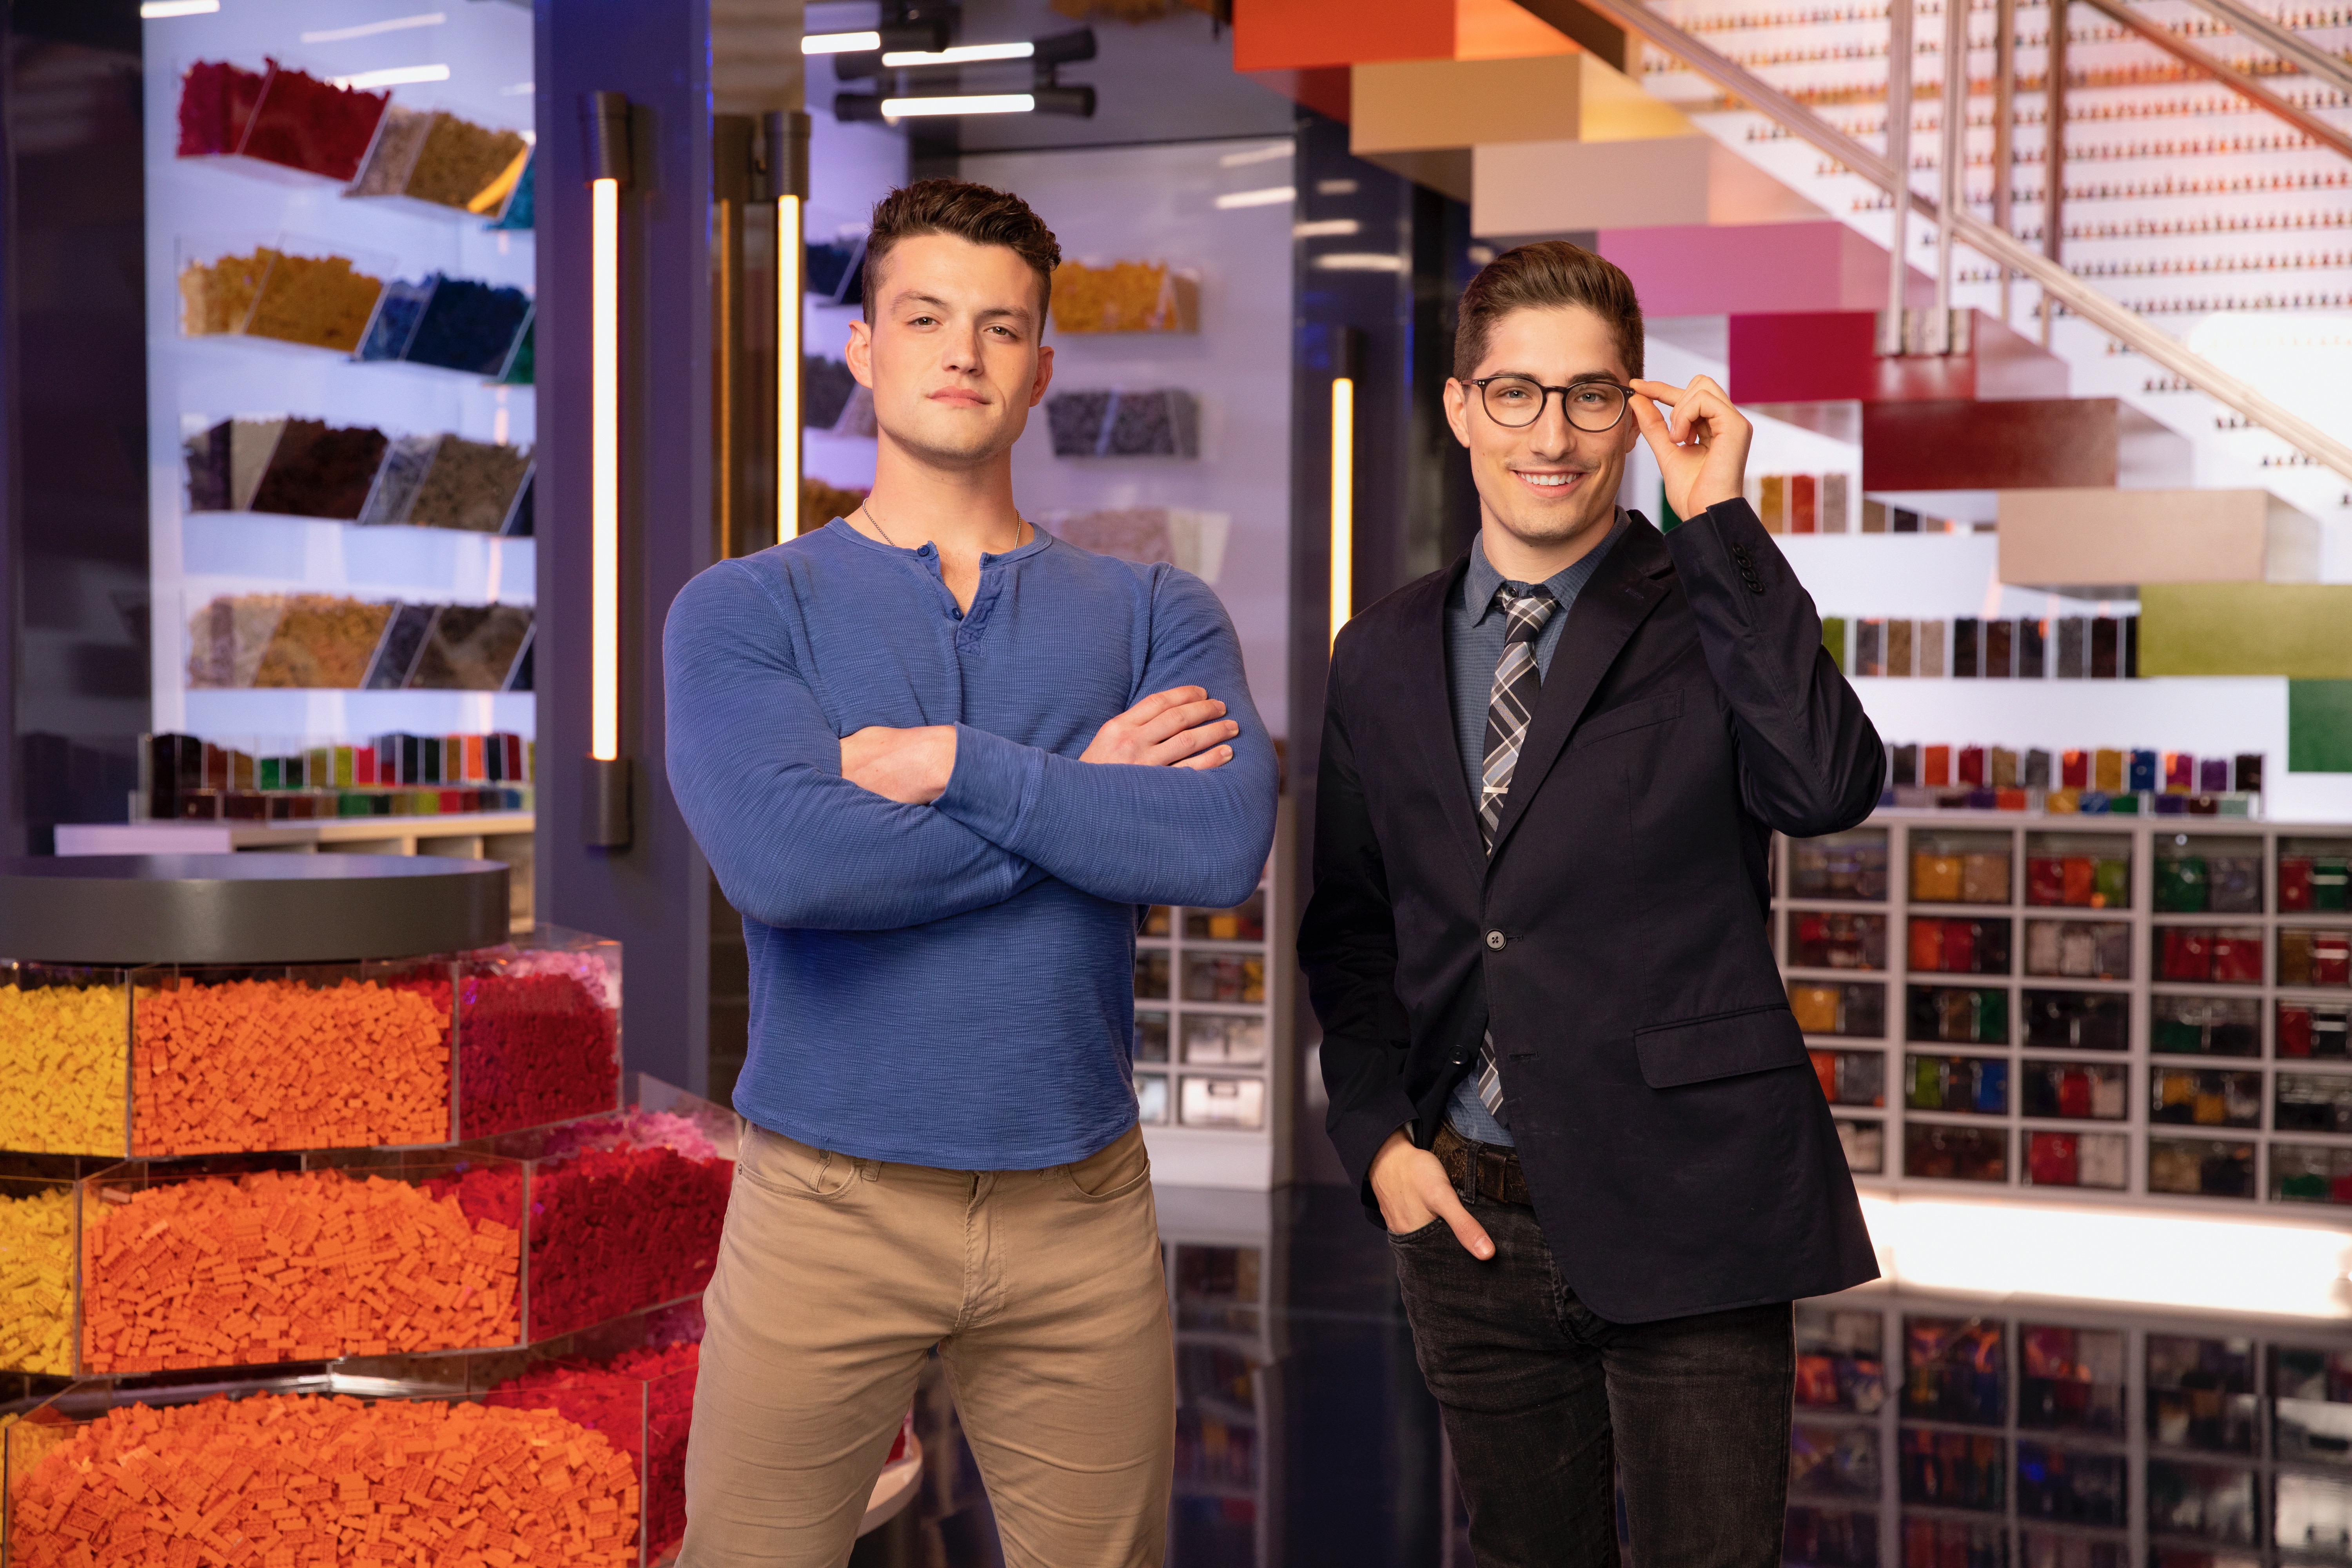 UofL student Christian Cowgill, left, is a competitor on FOX's Lego Masters.